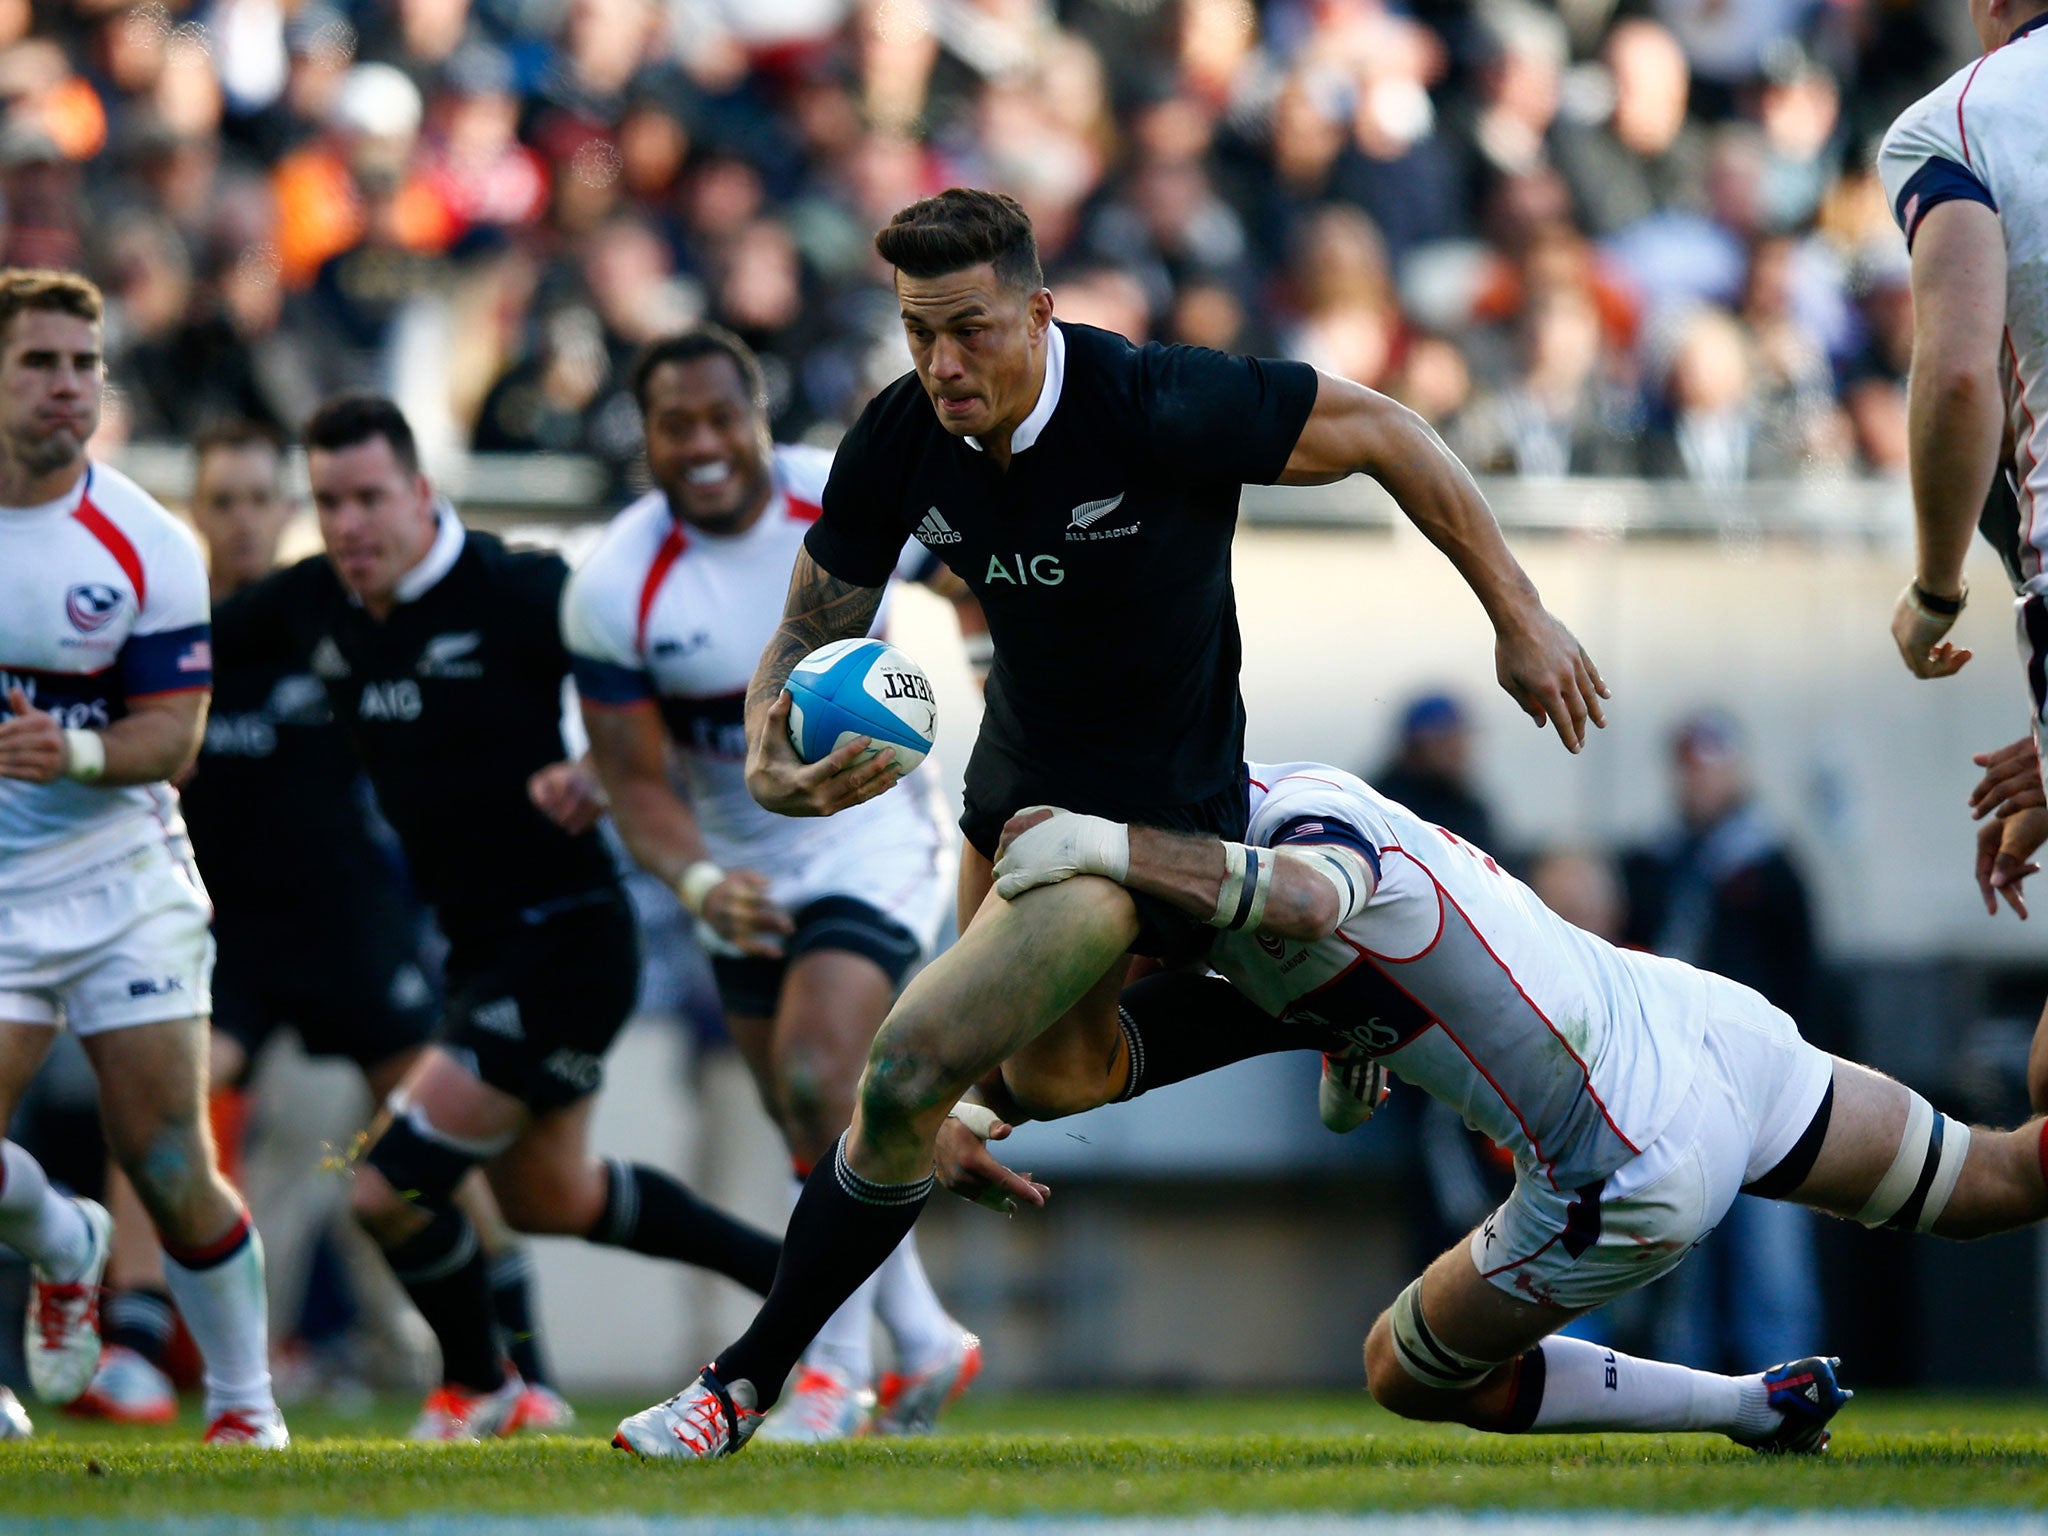 Sonny Bill Williams scored two tries for New Zealand, but ended the match early with a hip injury